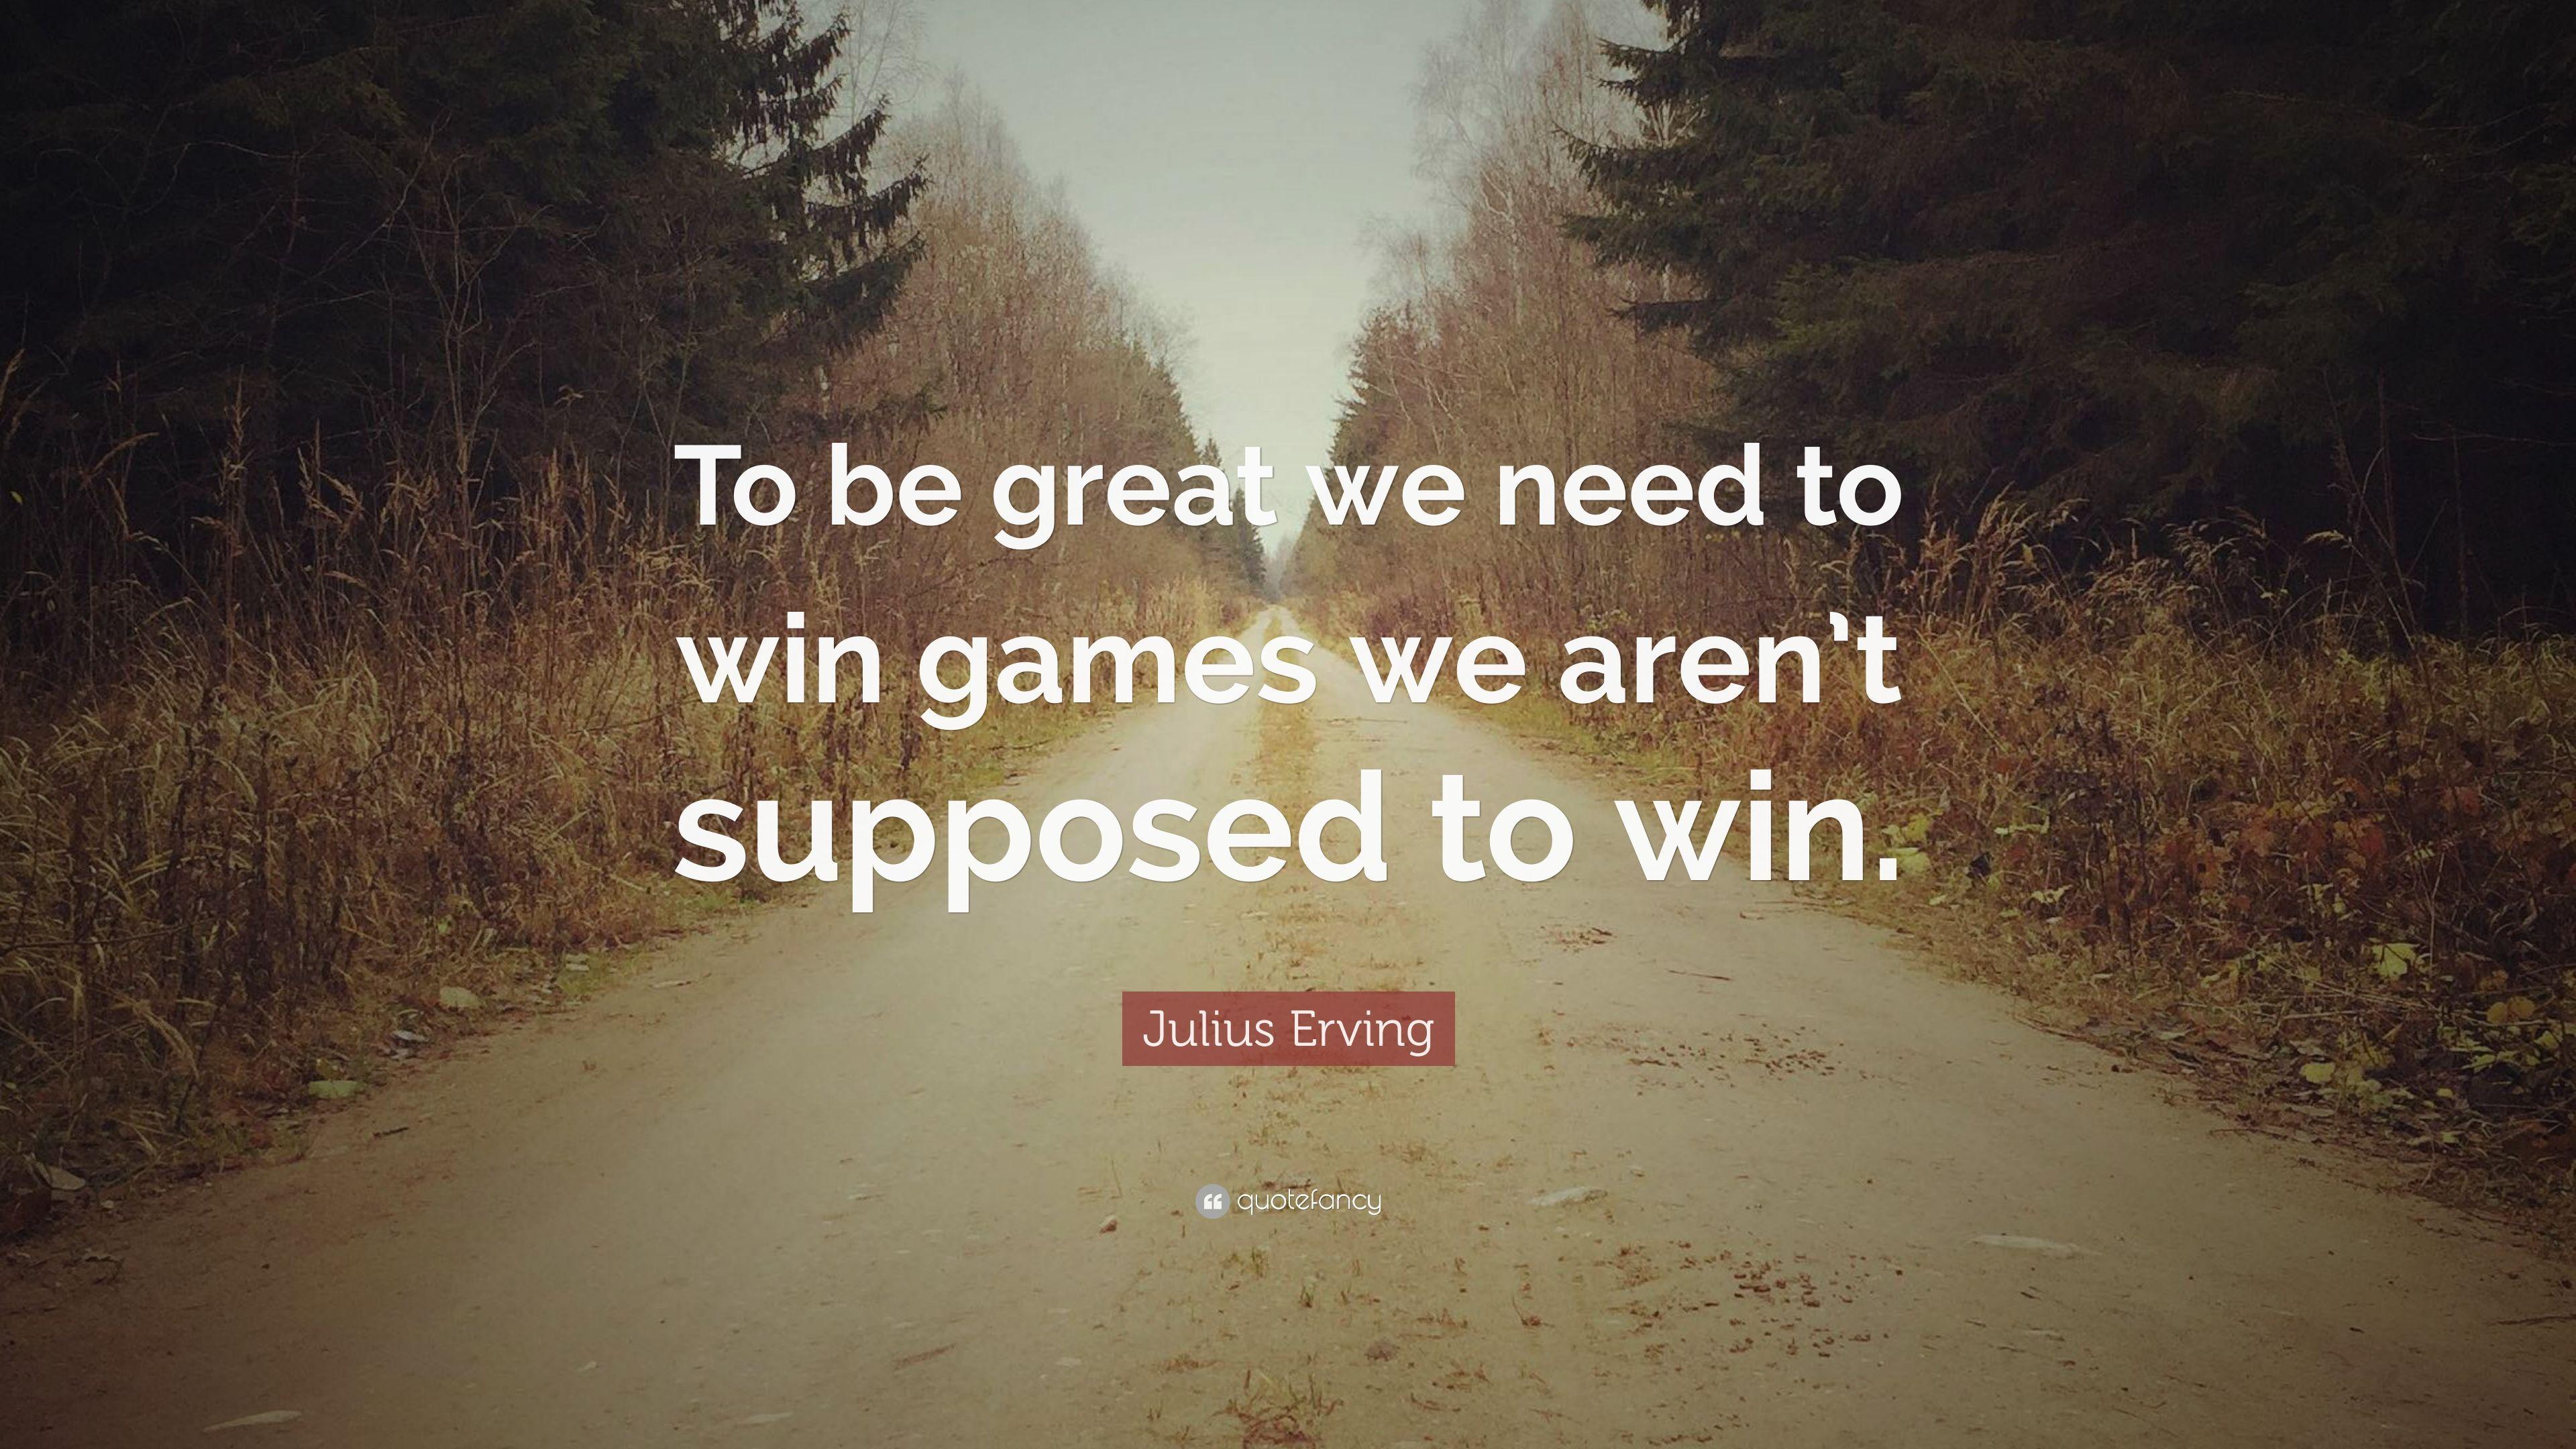 Julius Erving Quote: “To be great we need to win games we aren't